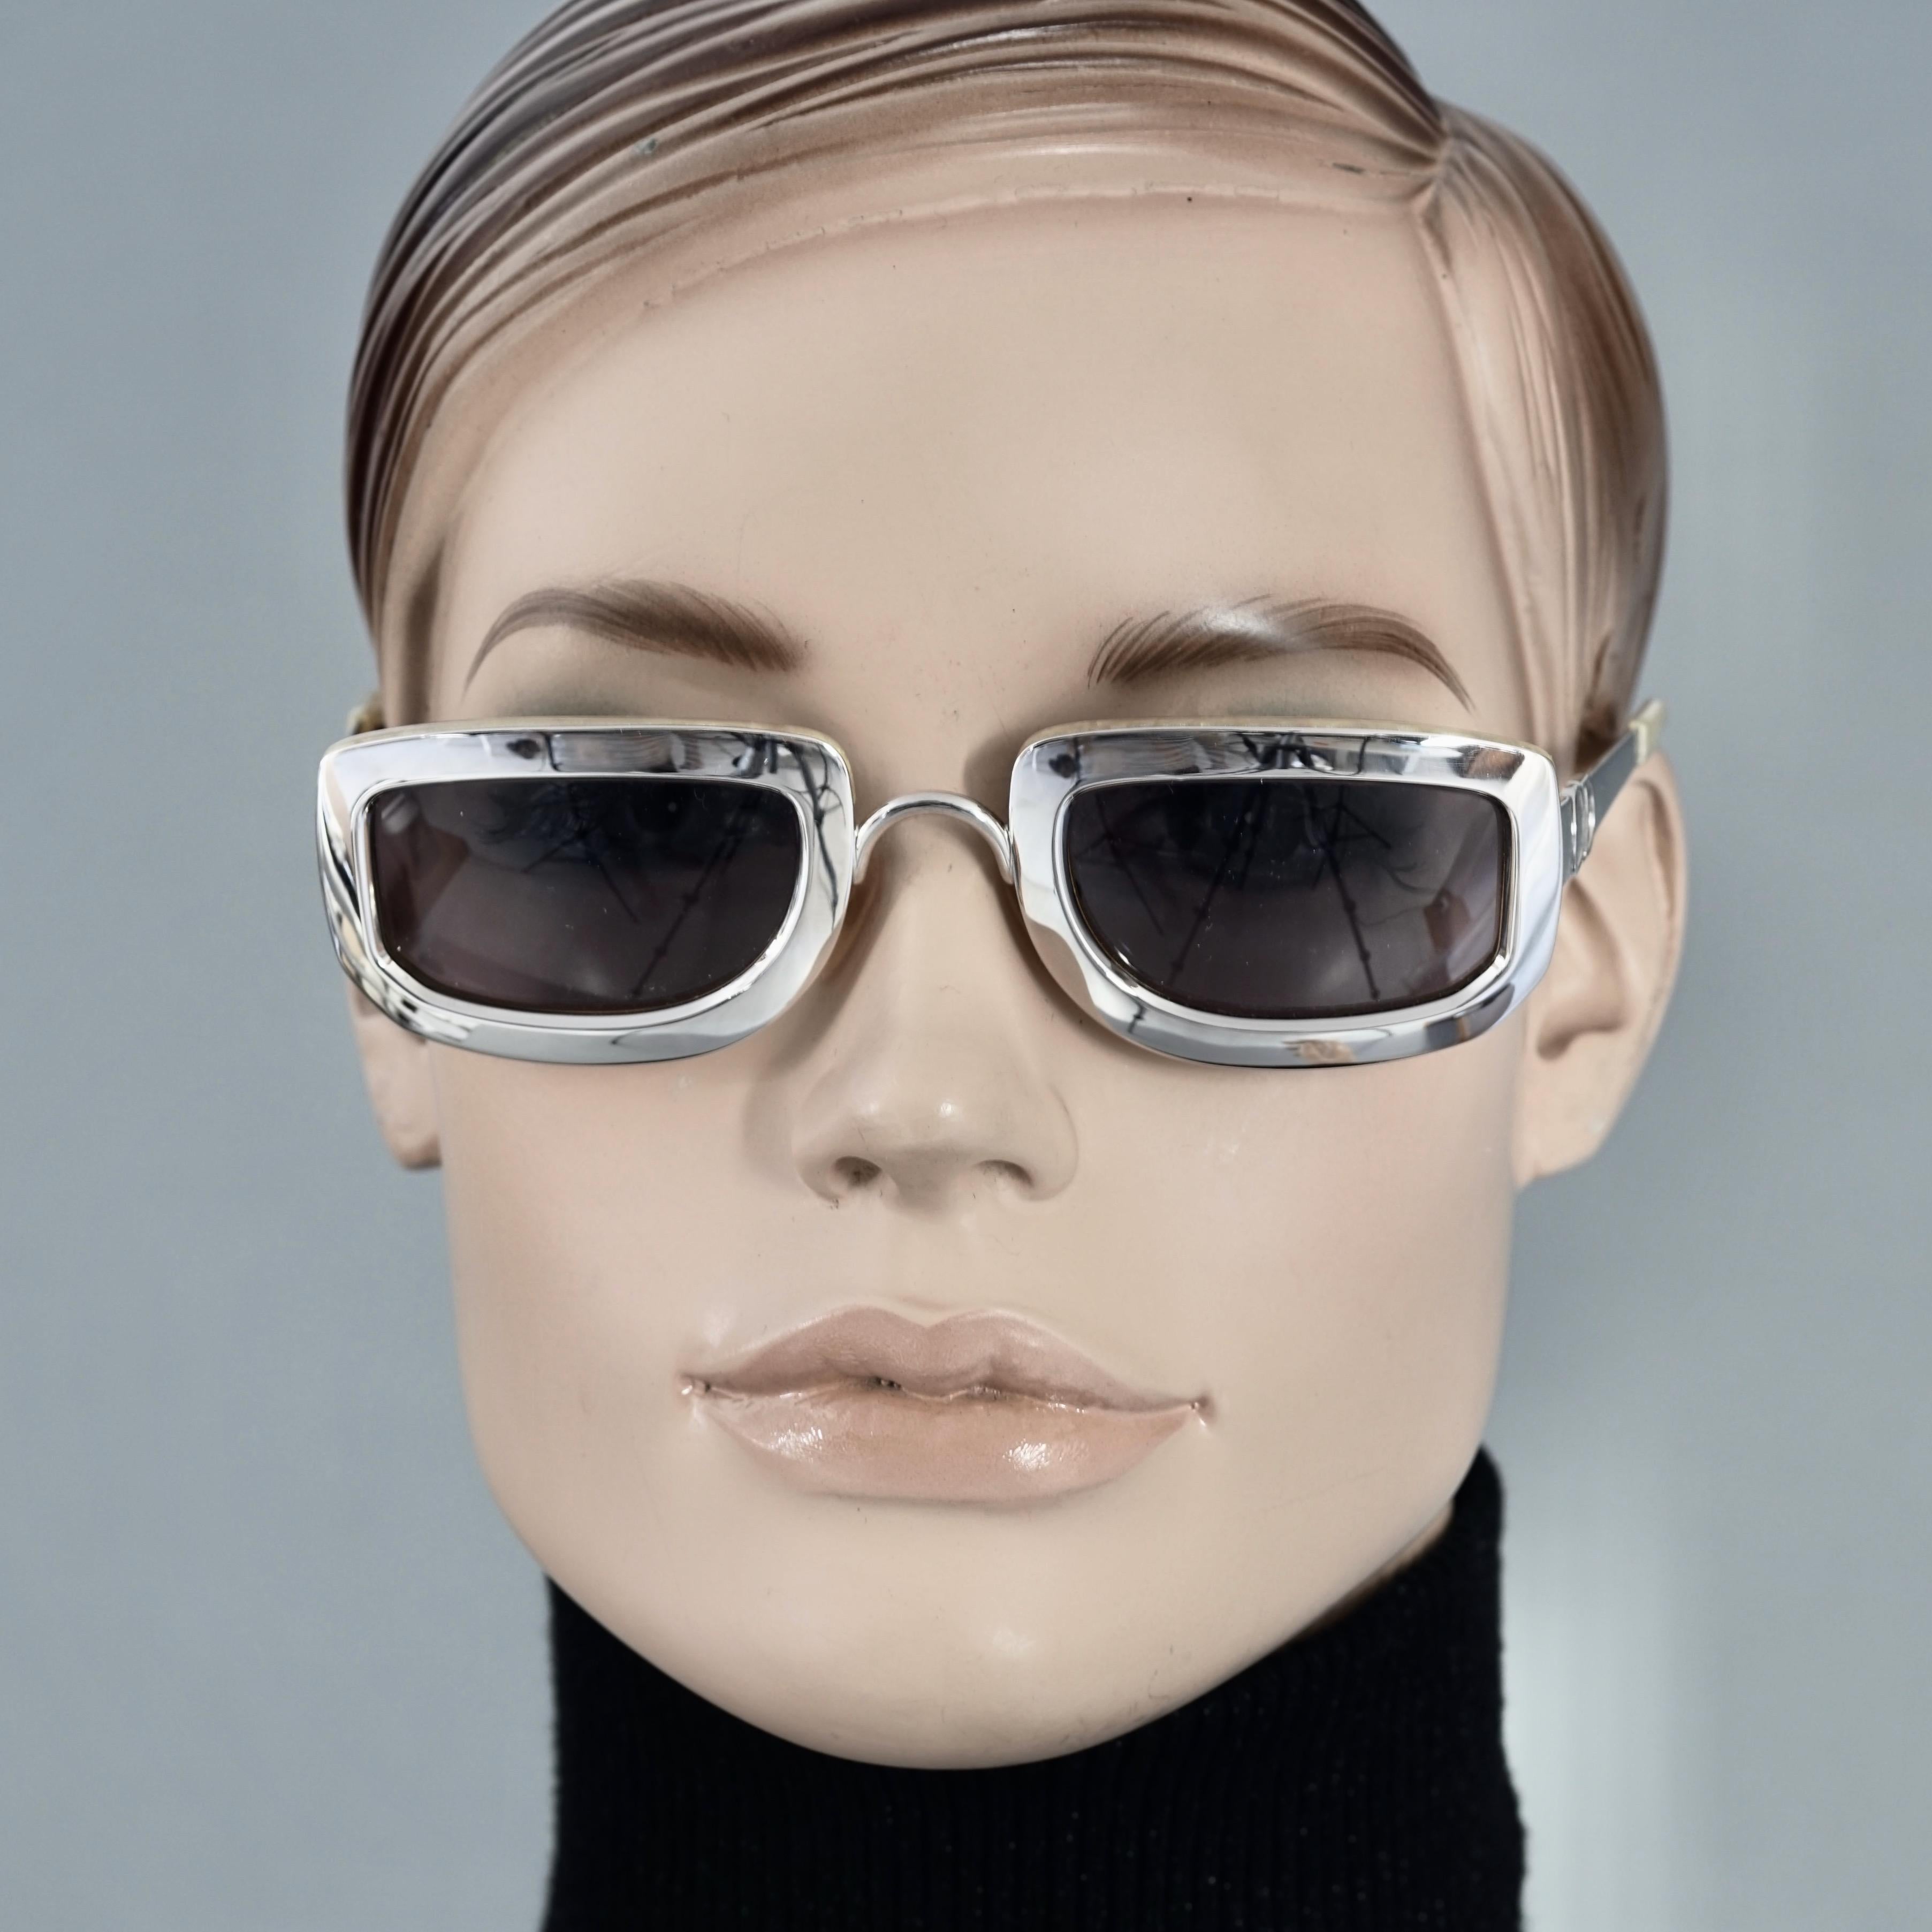 Vintage 1995 CHRISTIAN DIOR Silver Chrome Futuristic Sunglasses

Measurements:
Height: 1.53 inches (3.9 cm)
Horizontal Width: 5.03 inches (12.8 cm)
Arms: 4.80 inches (12.2 cm)

Features:
- 100% Authentic Vintage CHRISTIAN DIOR. 
- Rectangular silver